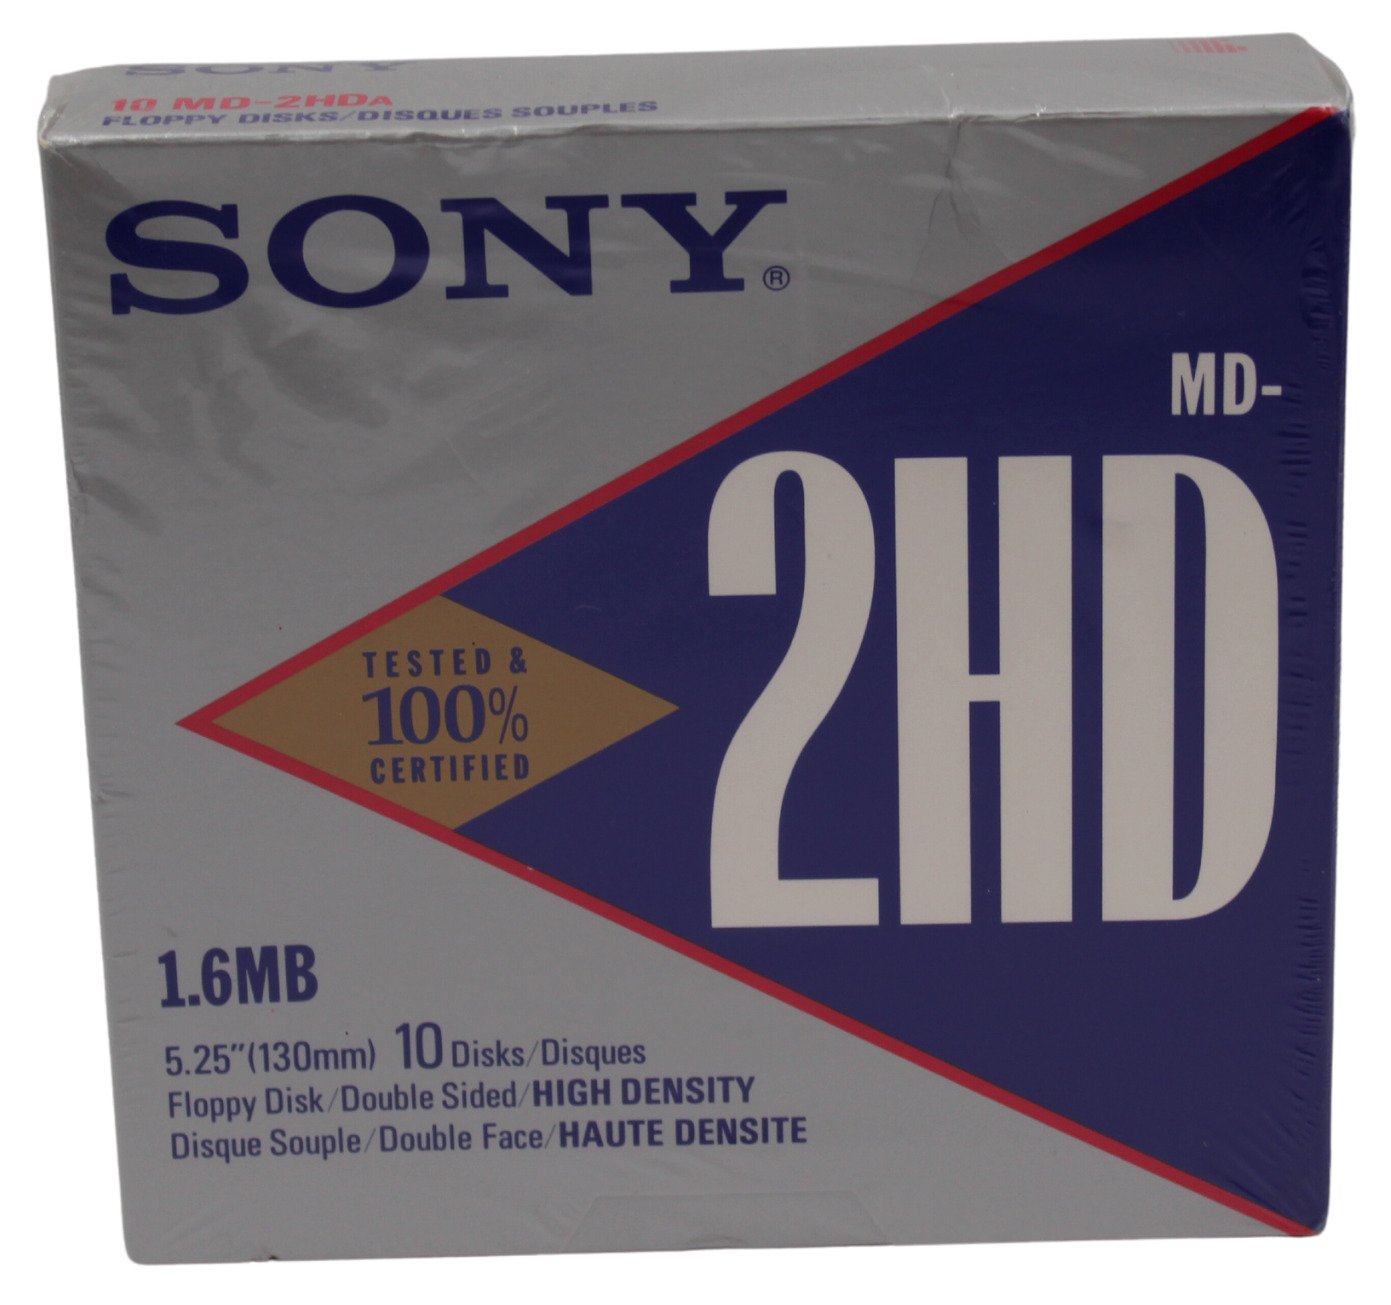 New Sony 5.25” (130mm) 1.6MB Double Sided High Density Floppy 10 Pack Disks